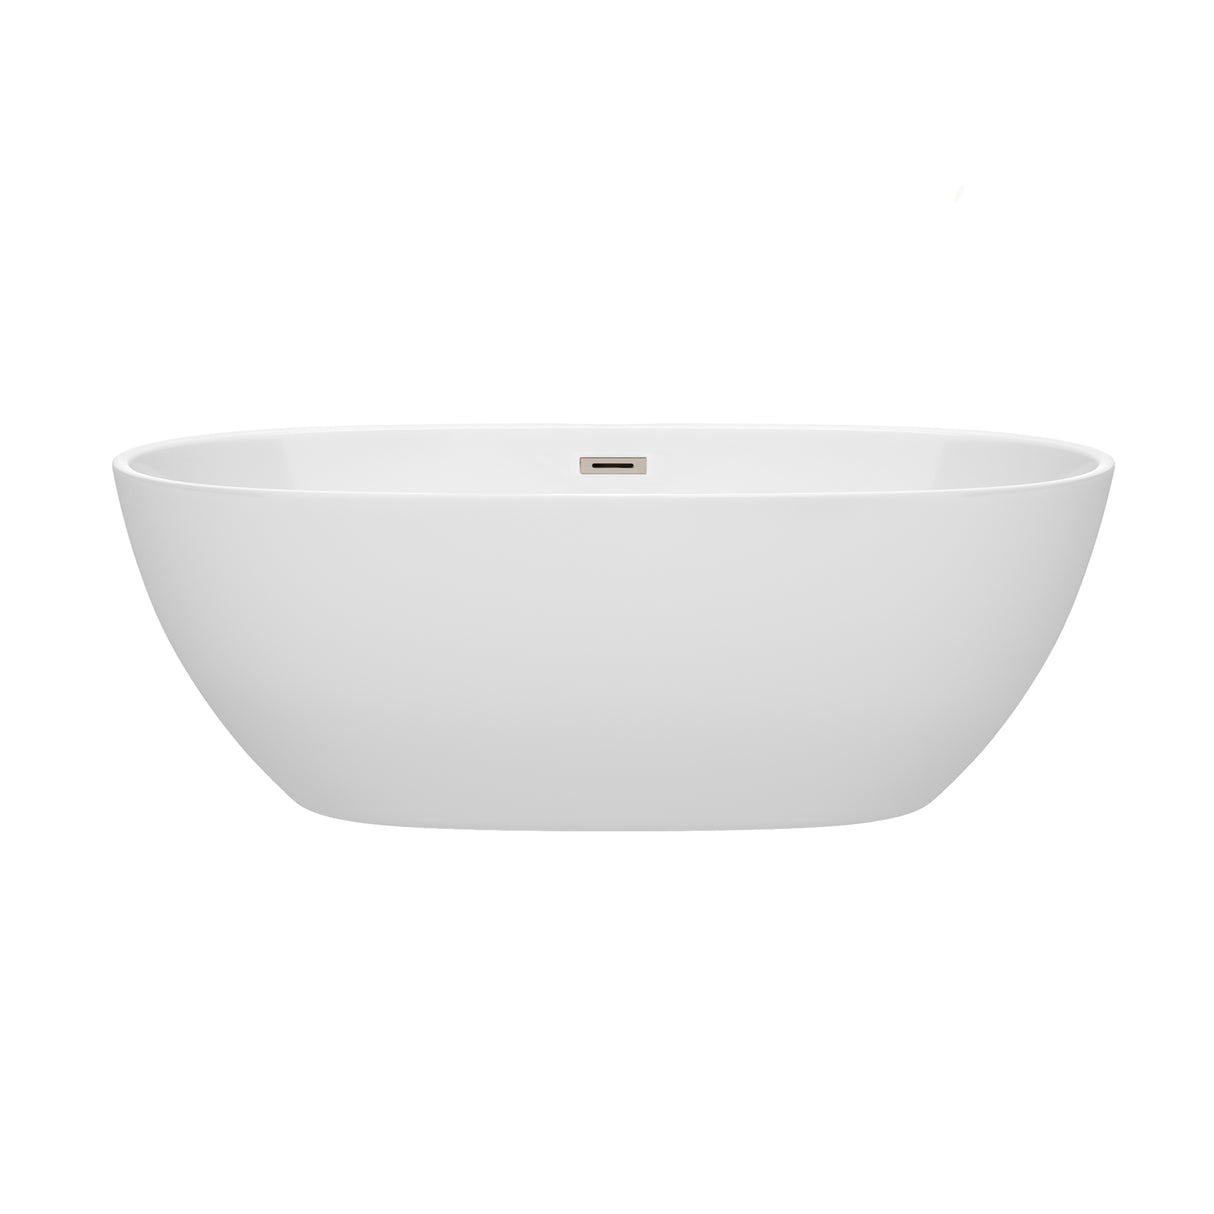 Juno 67 Inch Freestanding Bathtub in White with Brushed Nickel Drain and Overflow Trim